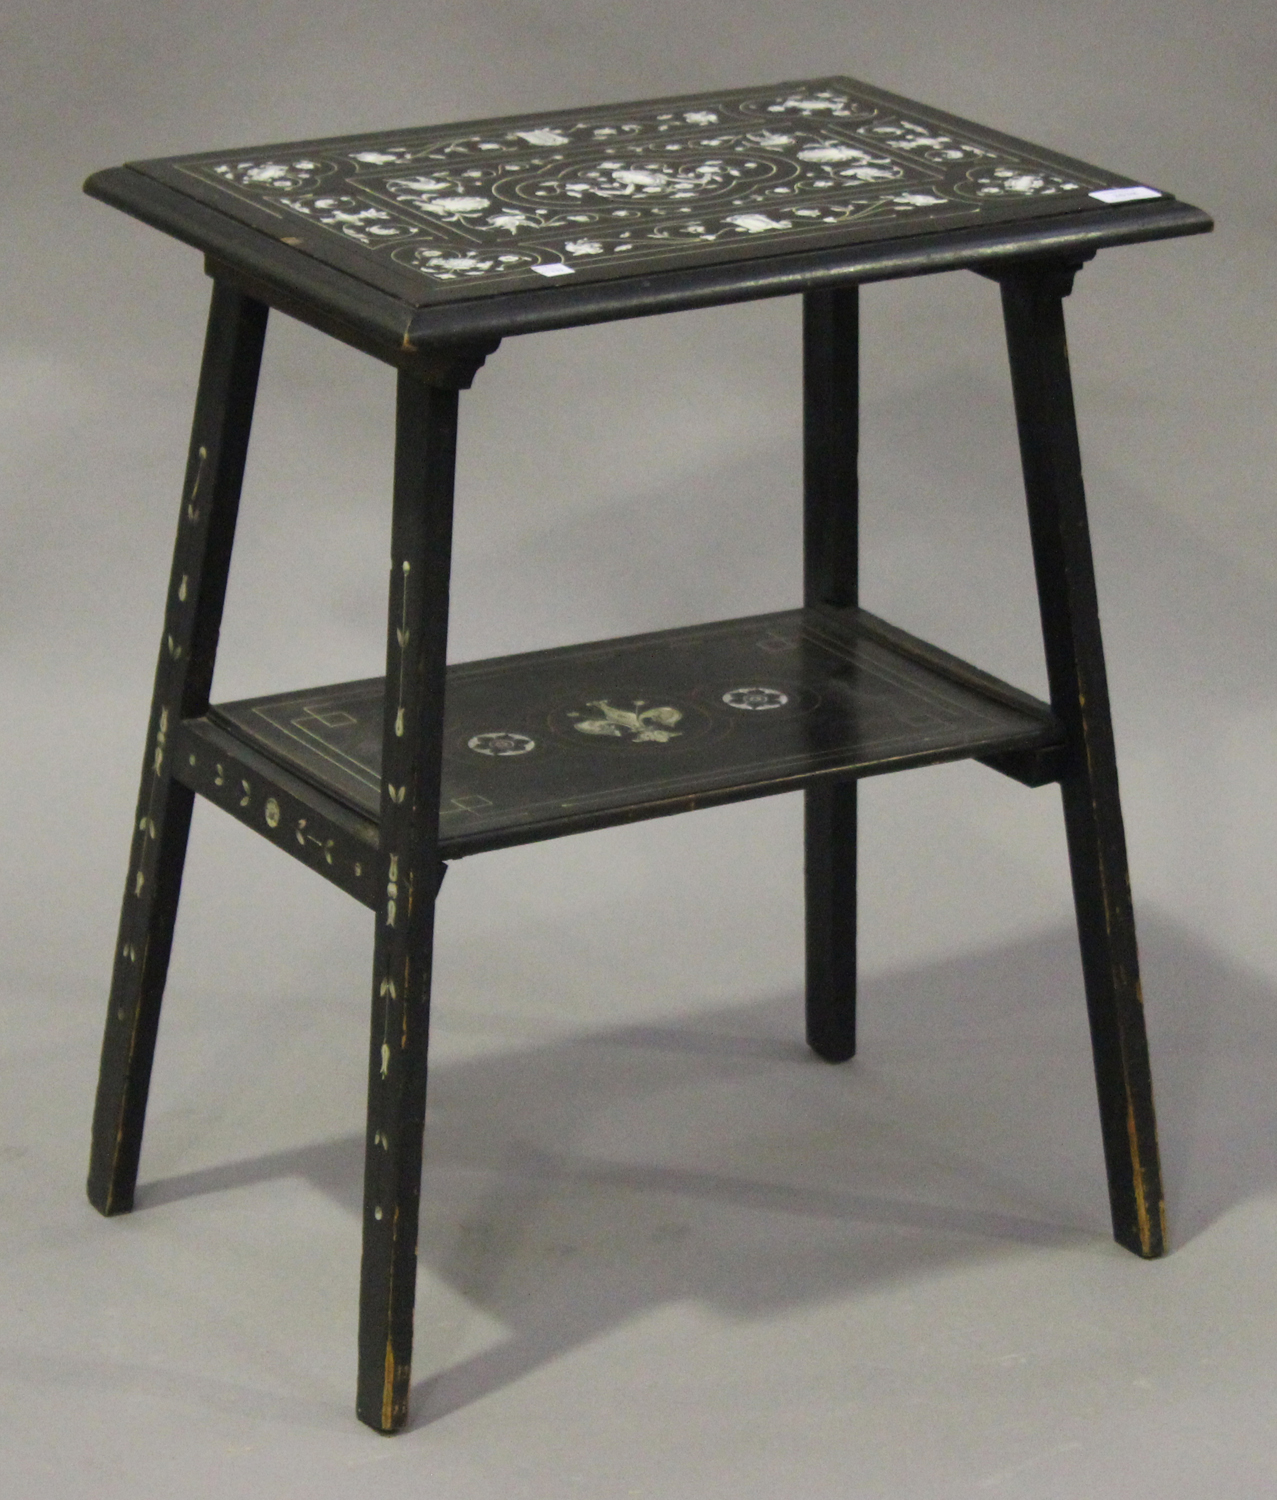 A late 19th century Italian ebonized two-tier occasional table with ivory inlaid decoration, on